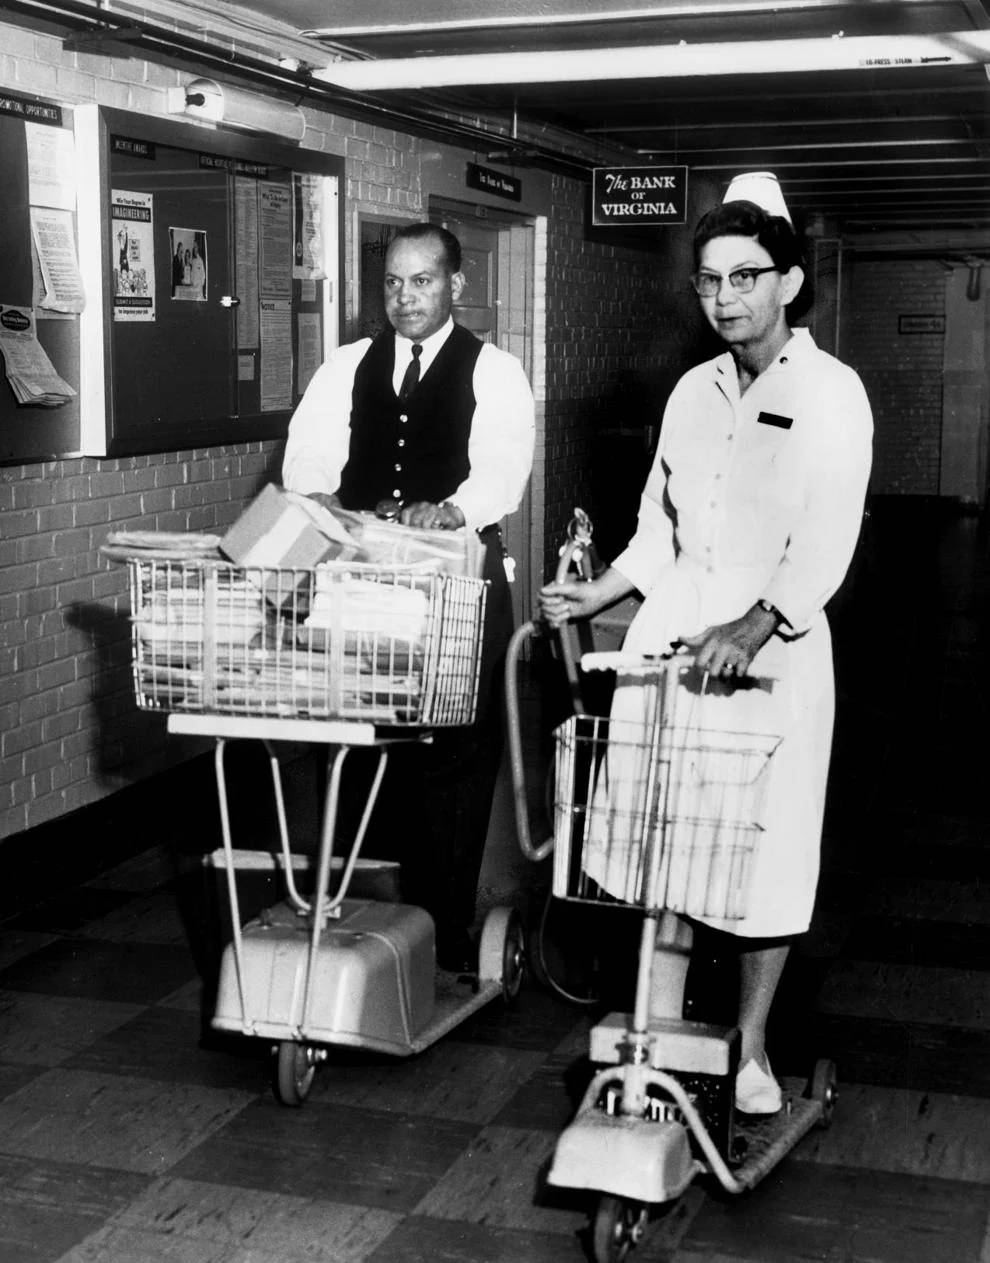 Charles W. Sykes and Freda S. Daniel of the McGuire Veterans Administration Hospital in Richmond used battery-powered scooters to take them from ward to ward, 1965.